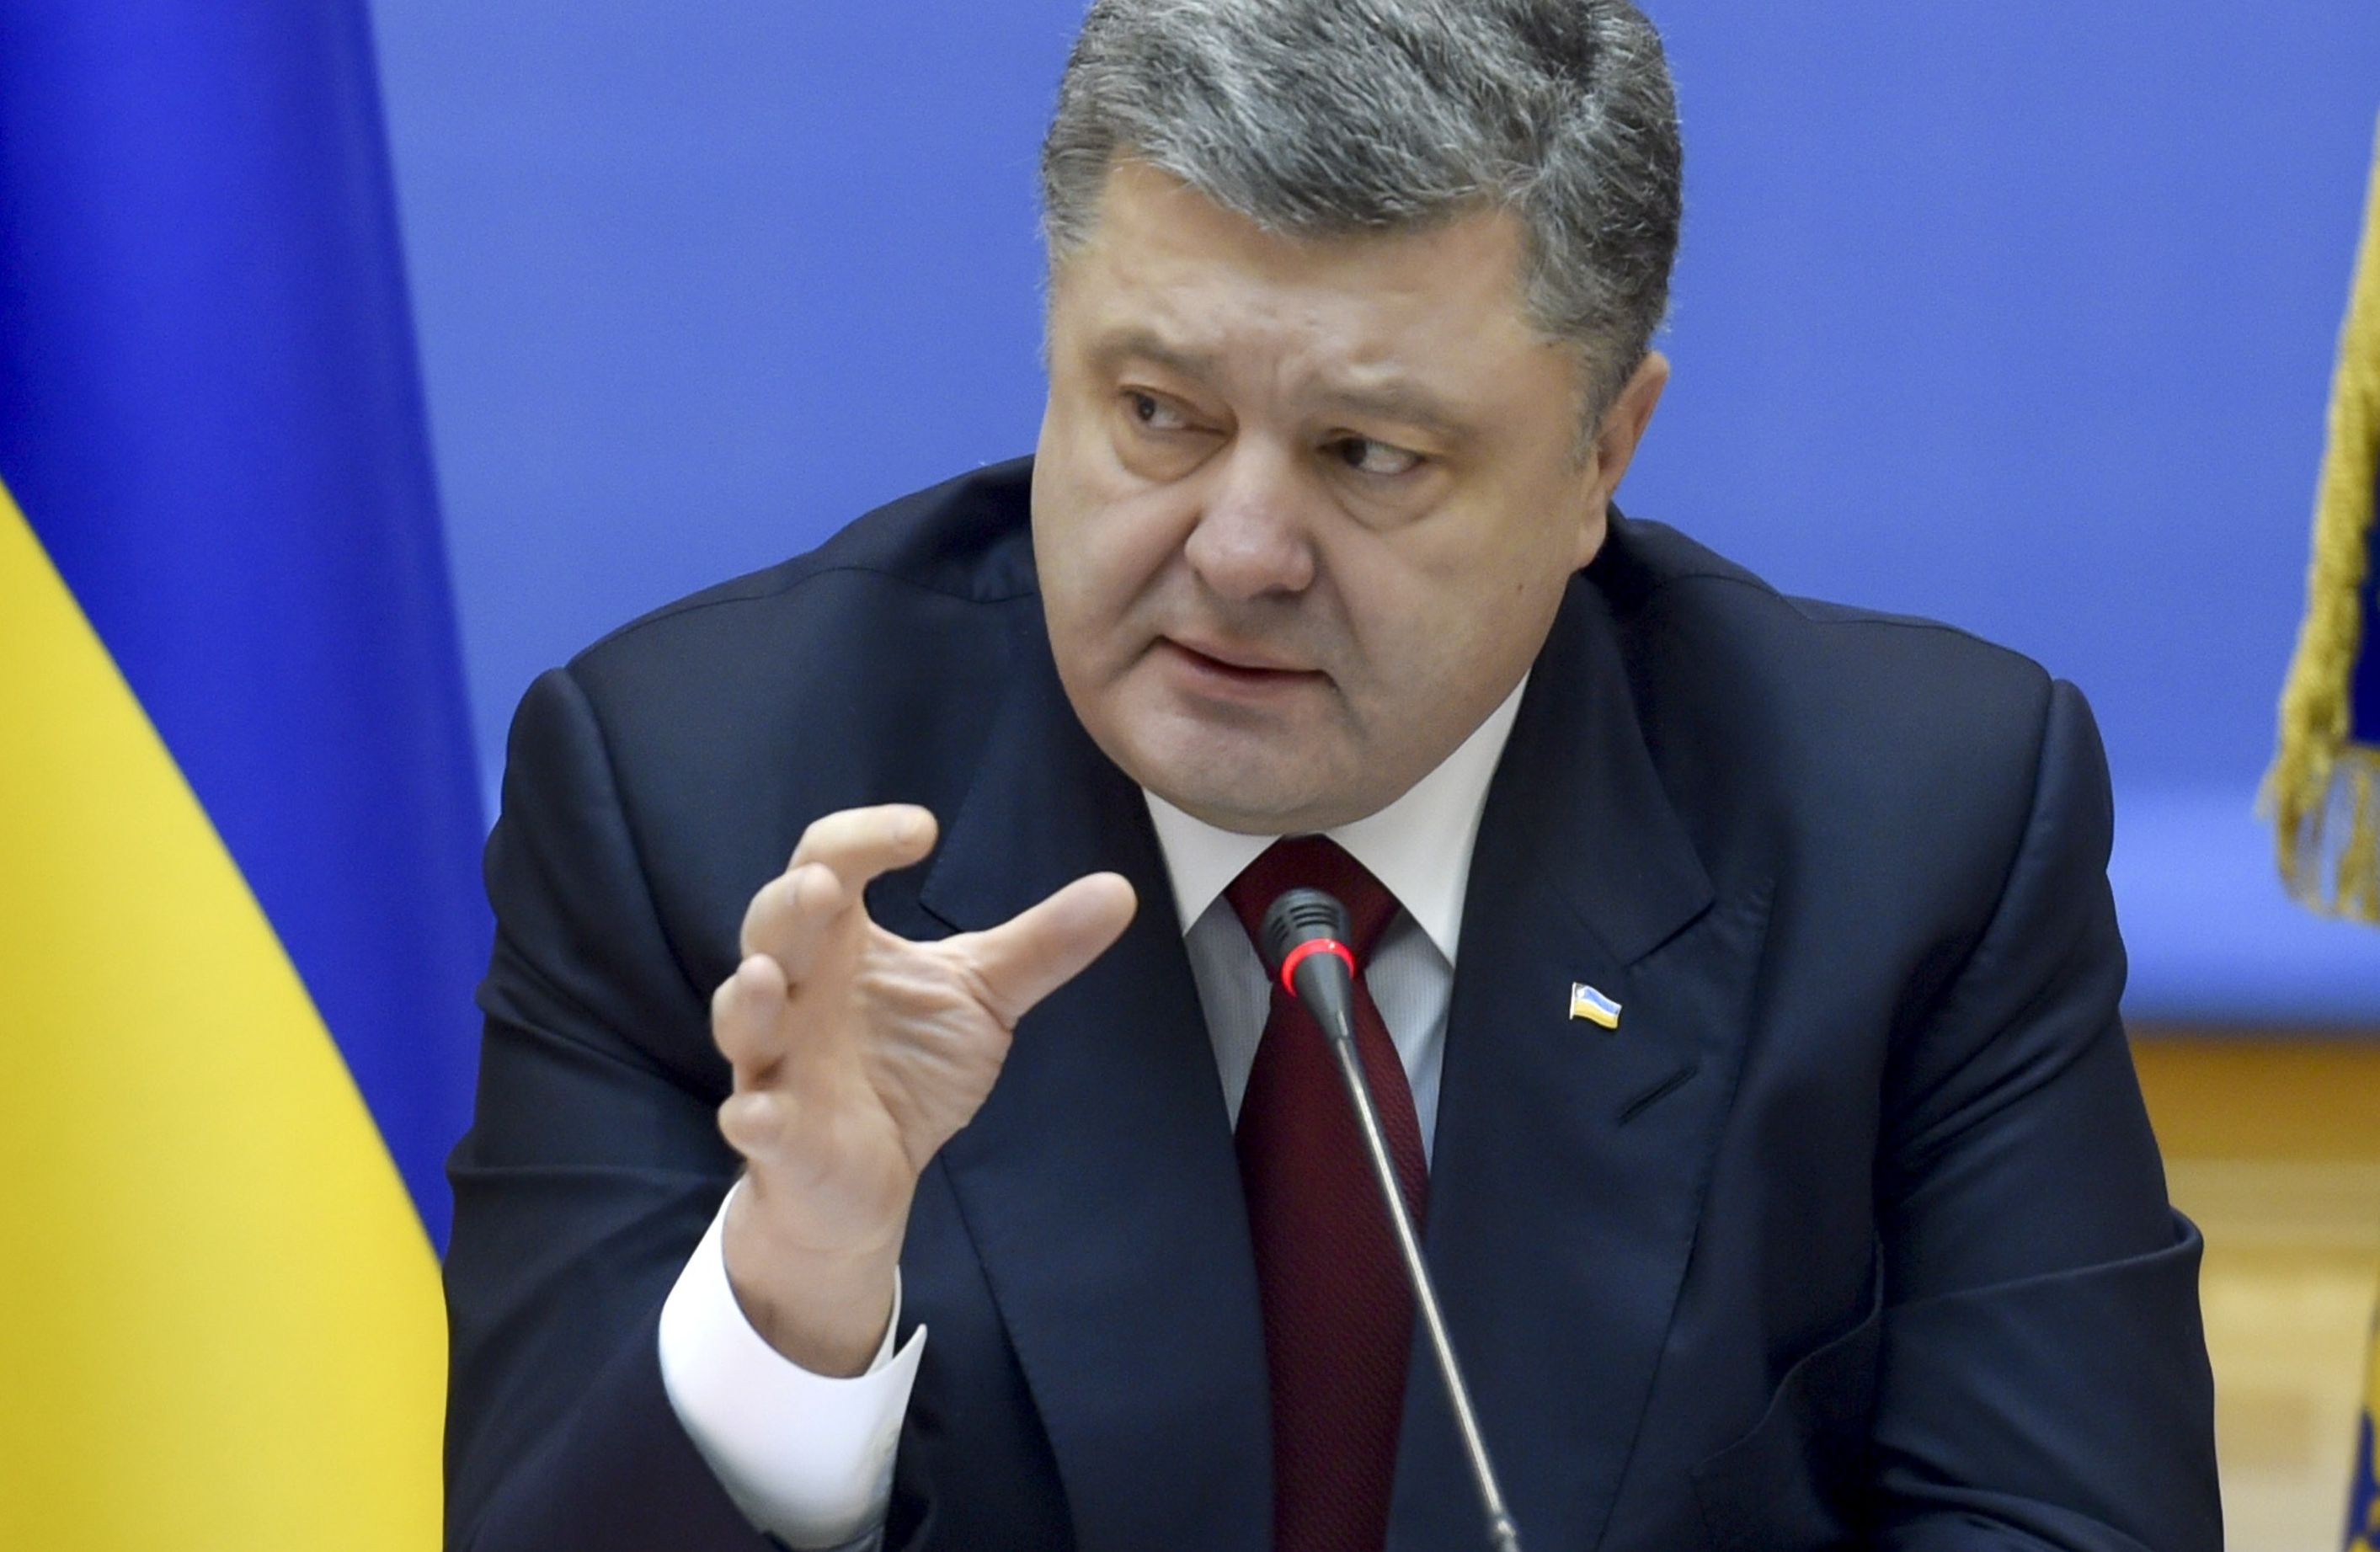 Ukrainian President Petro Poroshenko speaks during a government meeting in Kiev, February 11, 2015. Poroshenko said on Wednesday Ukraine was prepared to introduce martial law across Ukraine if the separatist conflict in the east escalates further, news agency Interfax reported. REUTERS/Mykola Lazarenko/Ukrainian Presidential Press Service/Handout via Reuters (UKRAINE - Tags: POLITICS CIVIL UNREST MILITARY CONFLICT) ATTENTION EDITORS - THIS PICTURE WAS PROVIDED BY A THIRD PARTY. REUTERS IS UNABLE TO INDEPENDENTLY VERIFY THE AUTHENTICITY, CONTENT, LOCATION OR DATE OF THIS IMAGE. FOR EDITORIAL USE ONLY. NOT FOR SALE FOR MARKETING OR ADVERTISING CAMPAIGNS. THIS PICTURE IS DISTRIBUTED EXACTLY AS RECEIVED BY REUTERS, AS A SERVICE TO CLIENTS